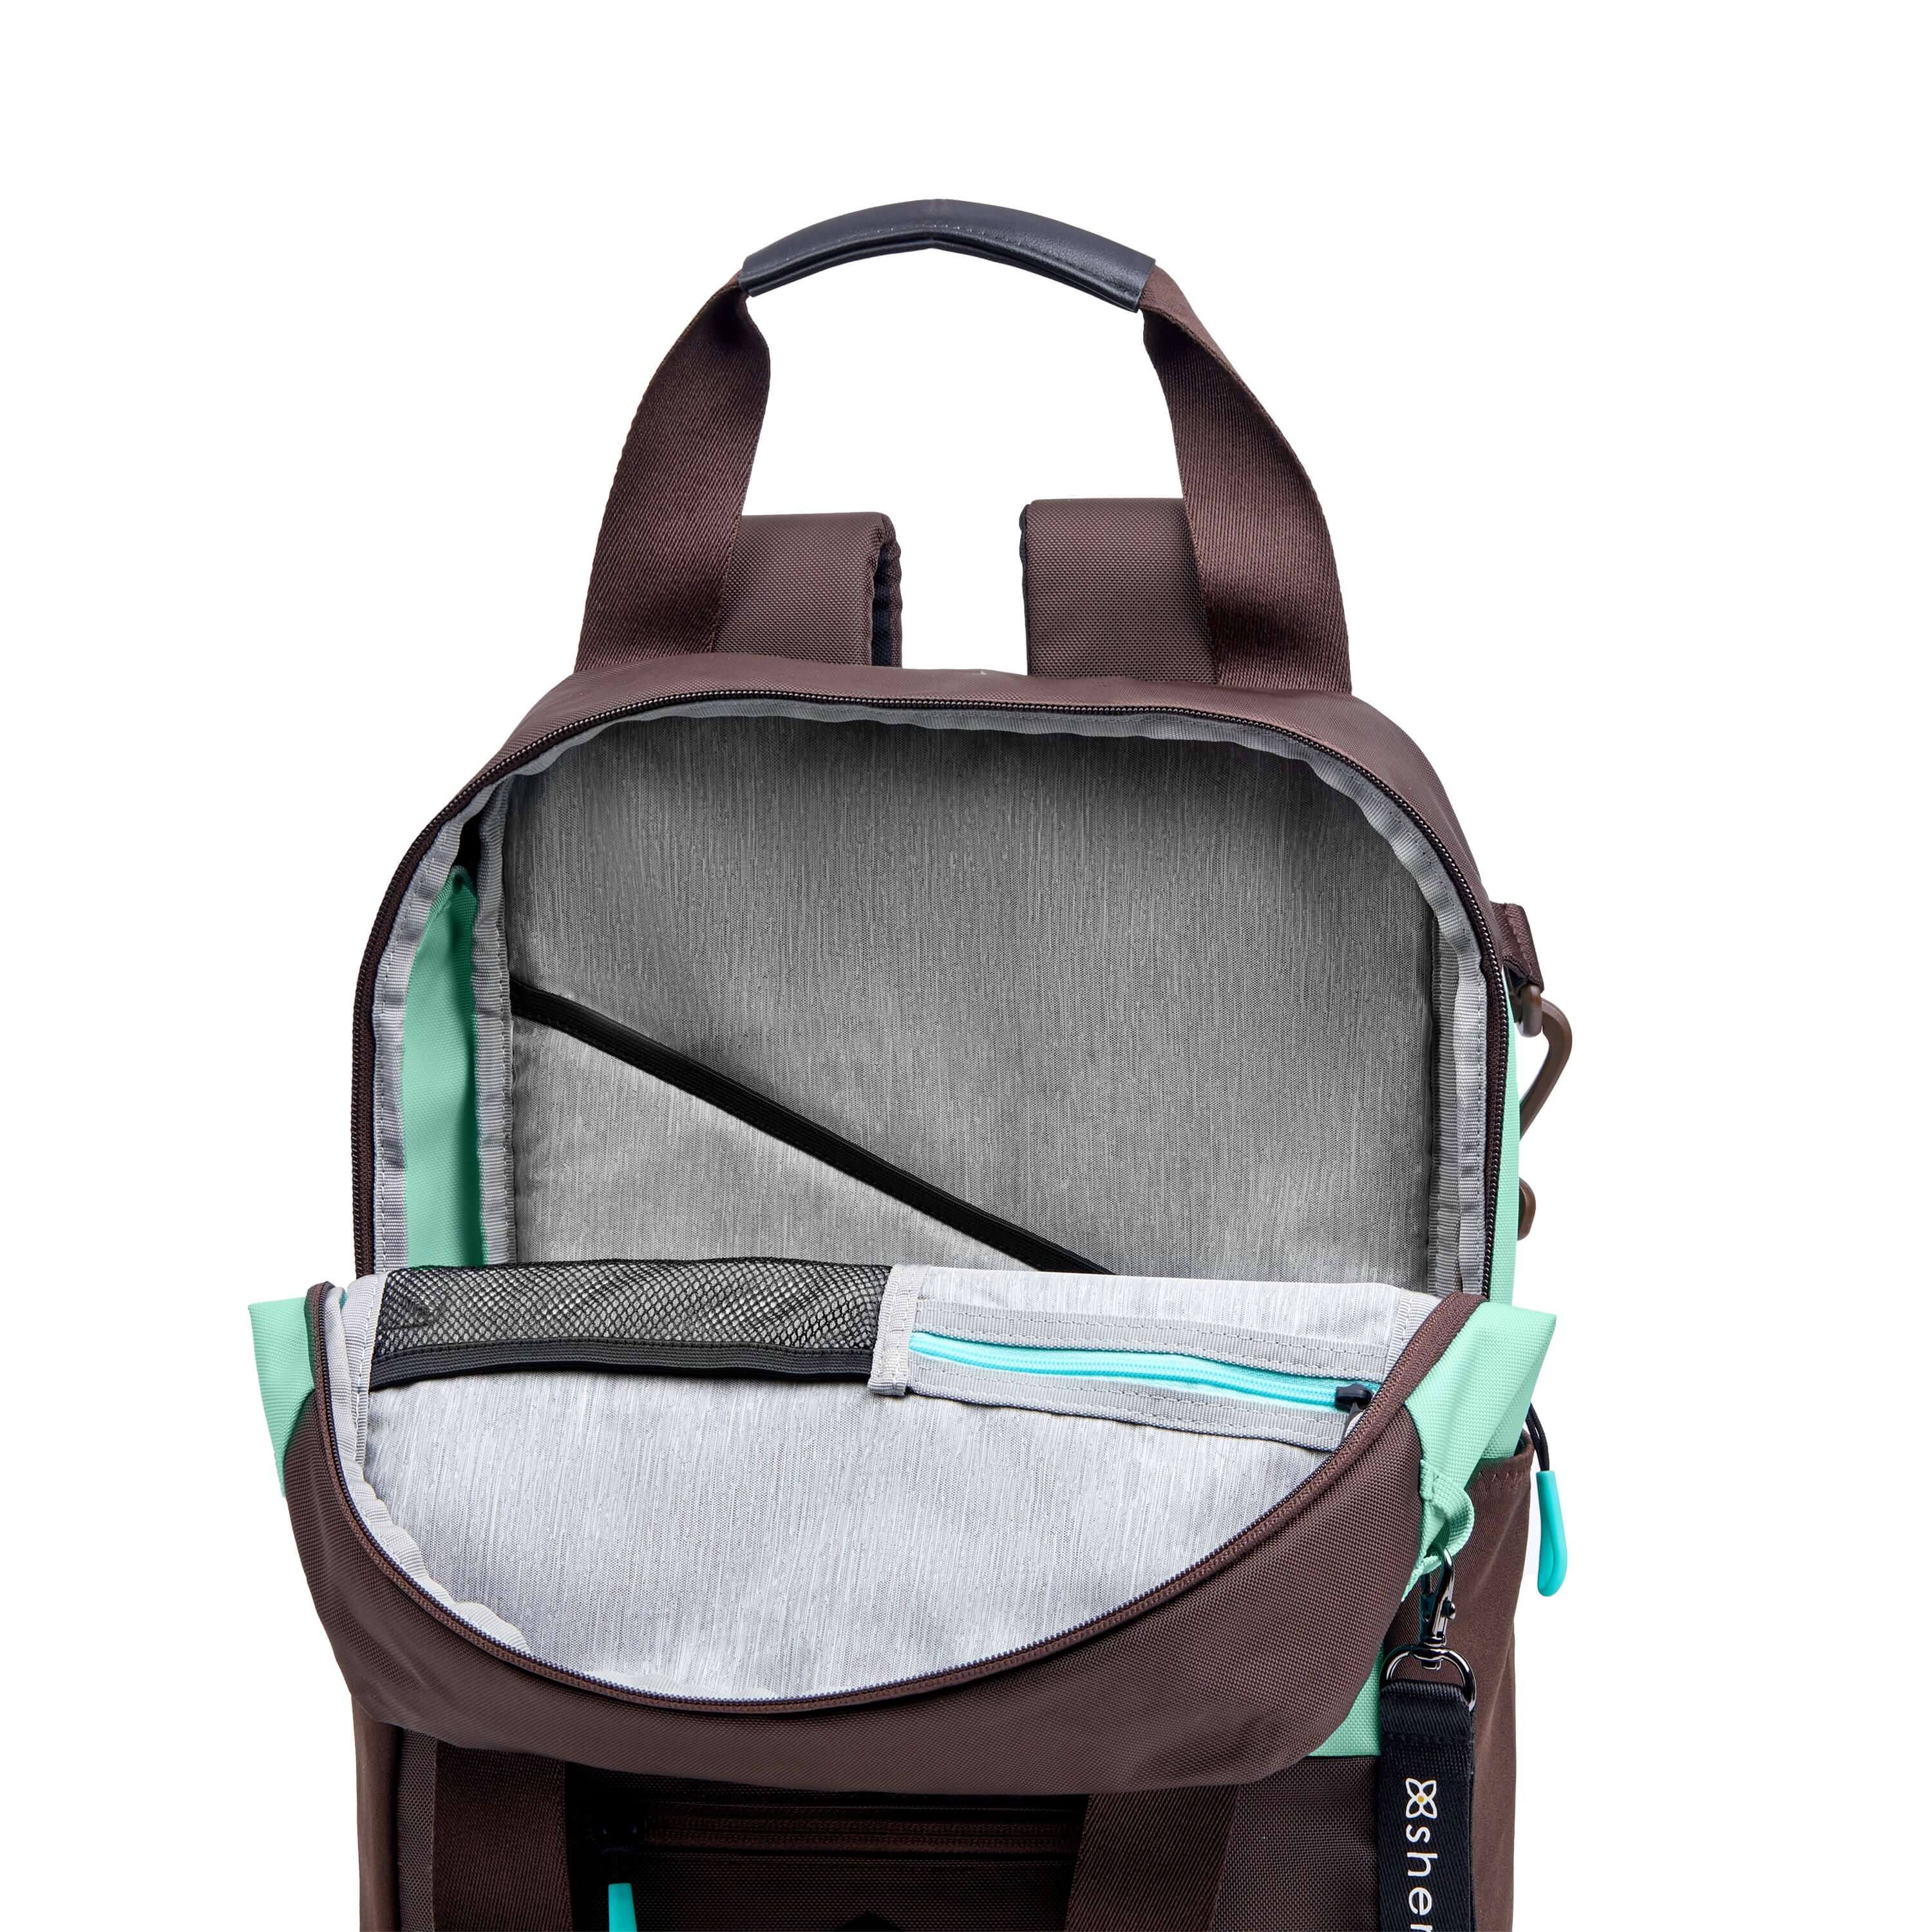 Front view of Sherpani's three-in-one bag, the Camden in Seagreen. The main zipper compartment is open to reveal a light gray interior with a padded laptop sleeve, zipper pocket and mesh pocket. 